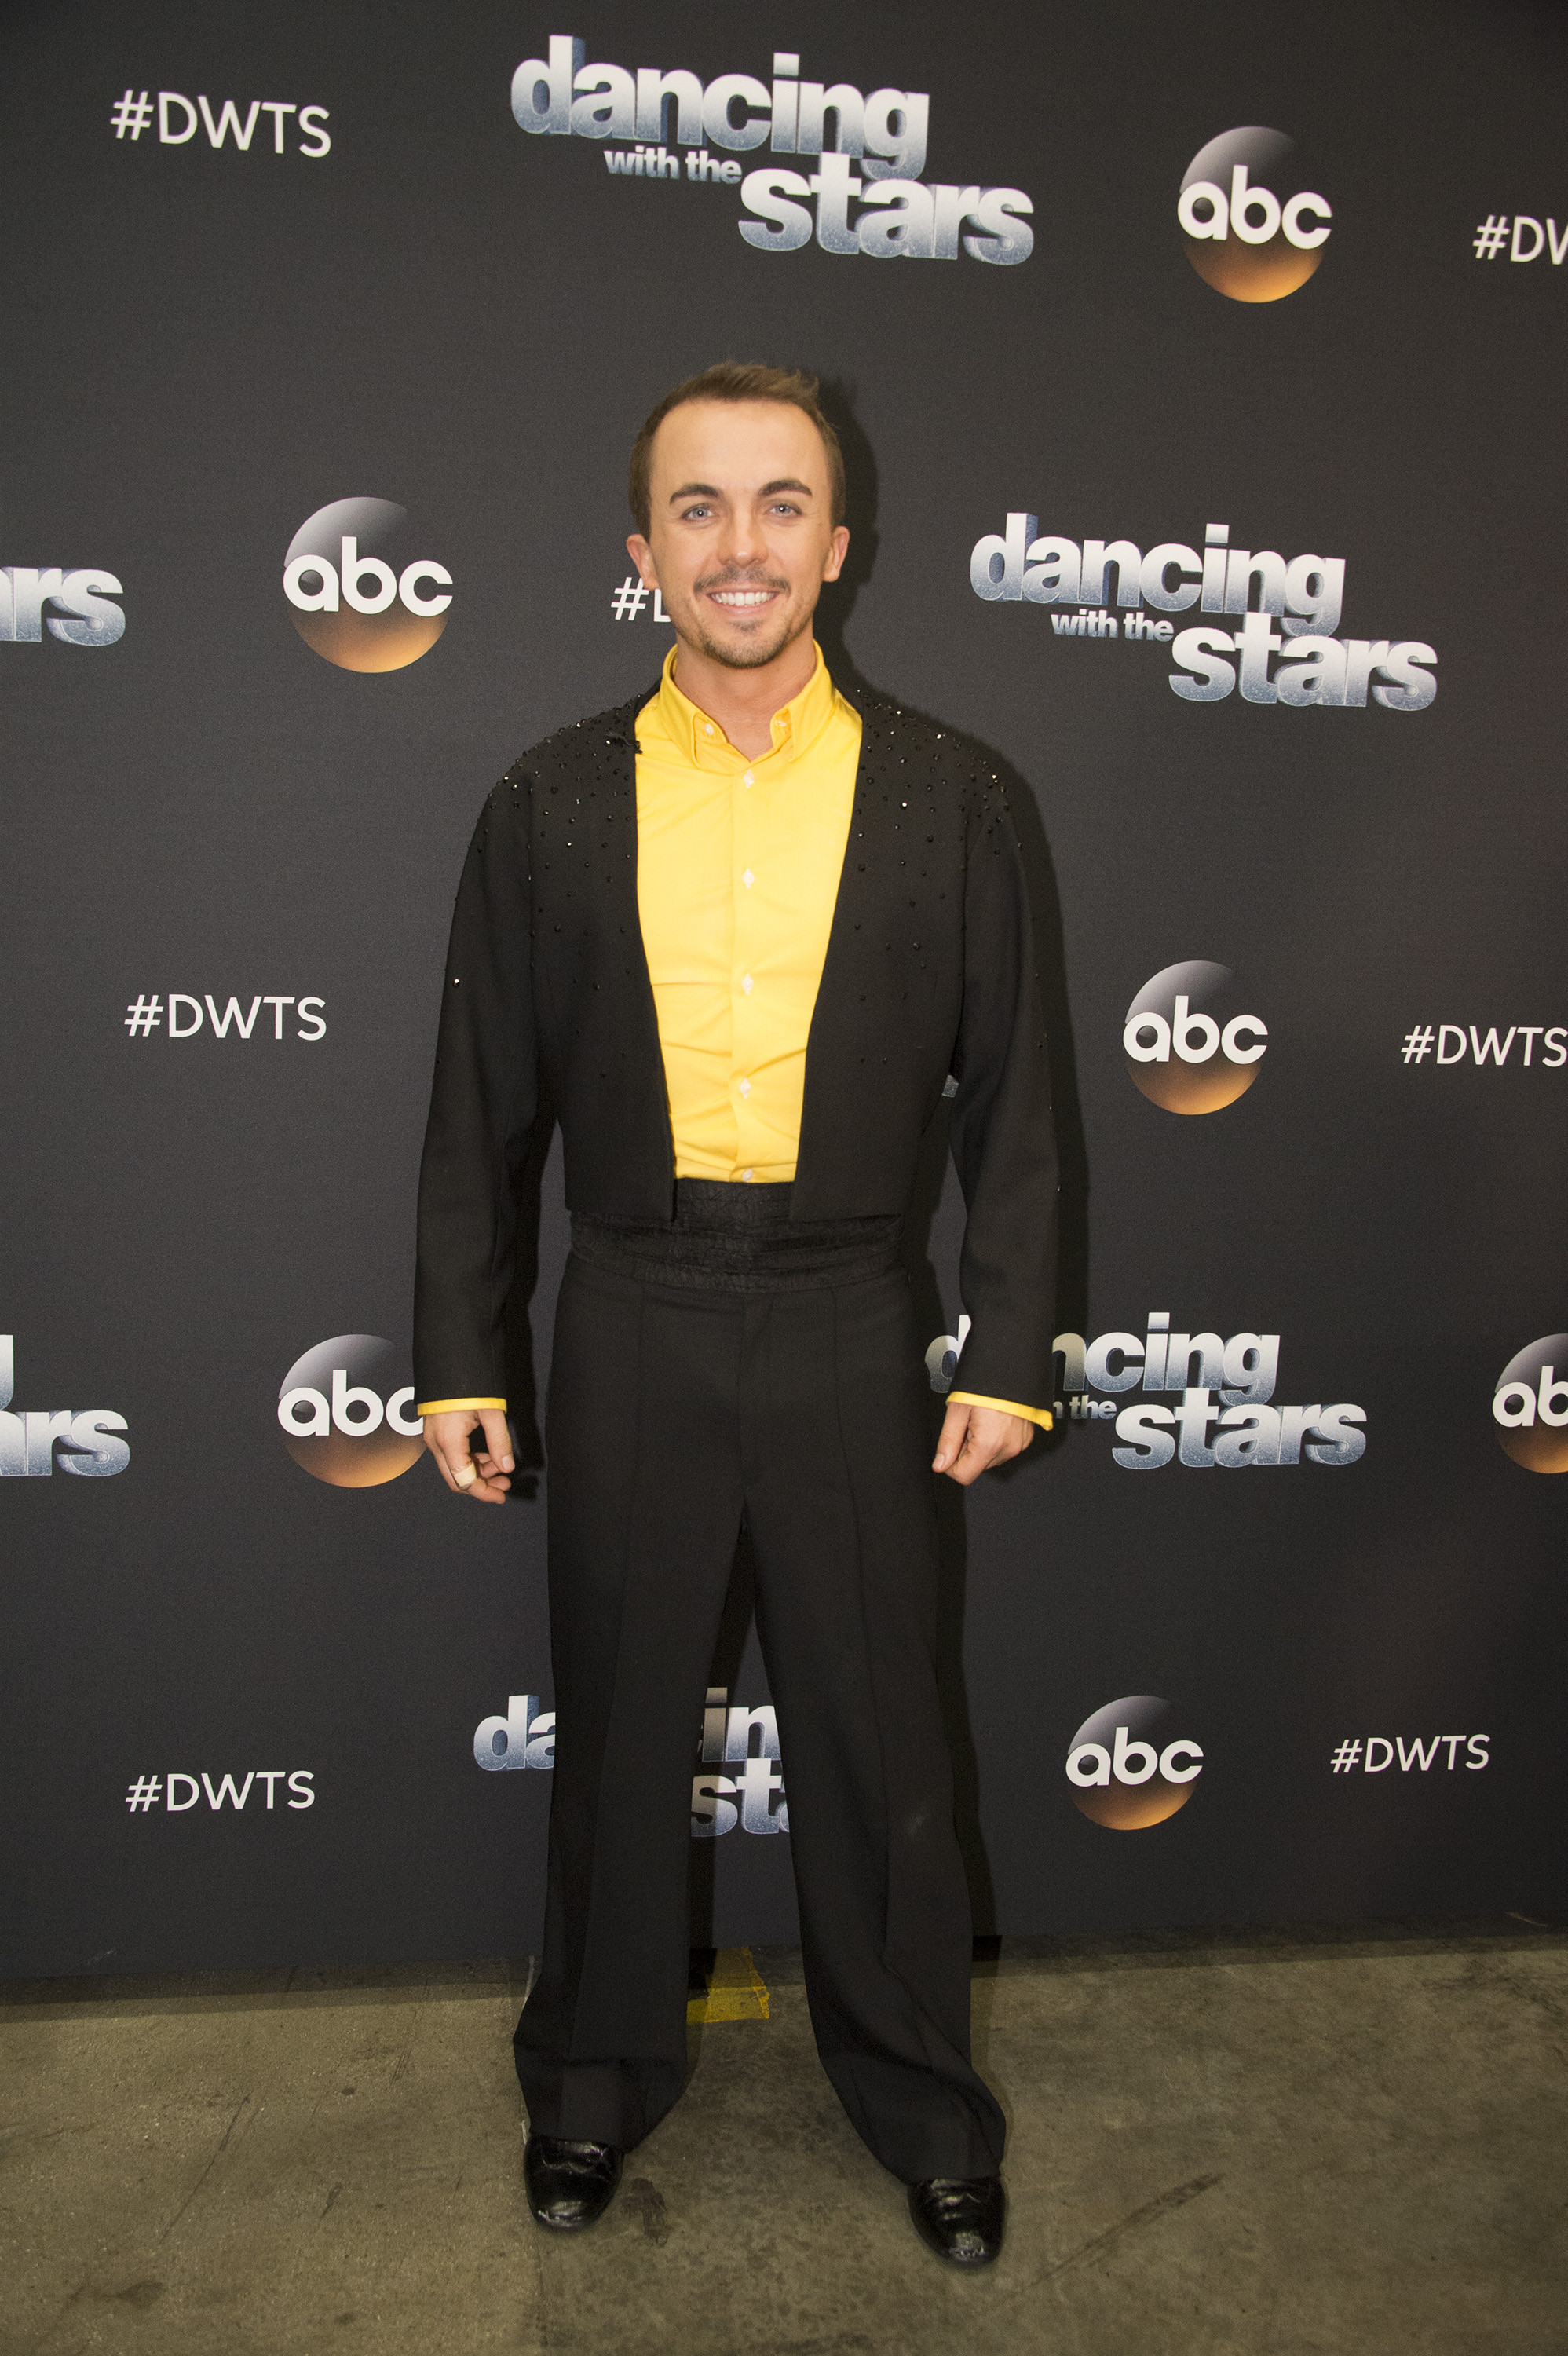 Frankie Muniz during week 9, season 25 of "Dancing With the Stars" on November 13, 2017 in Los Angeles, California | Source: Getty Images